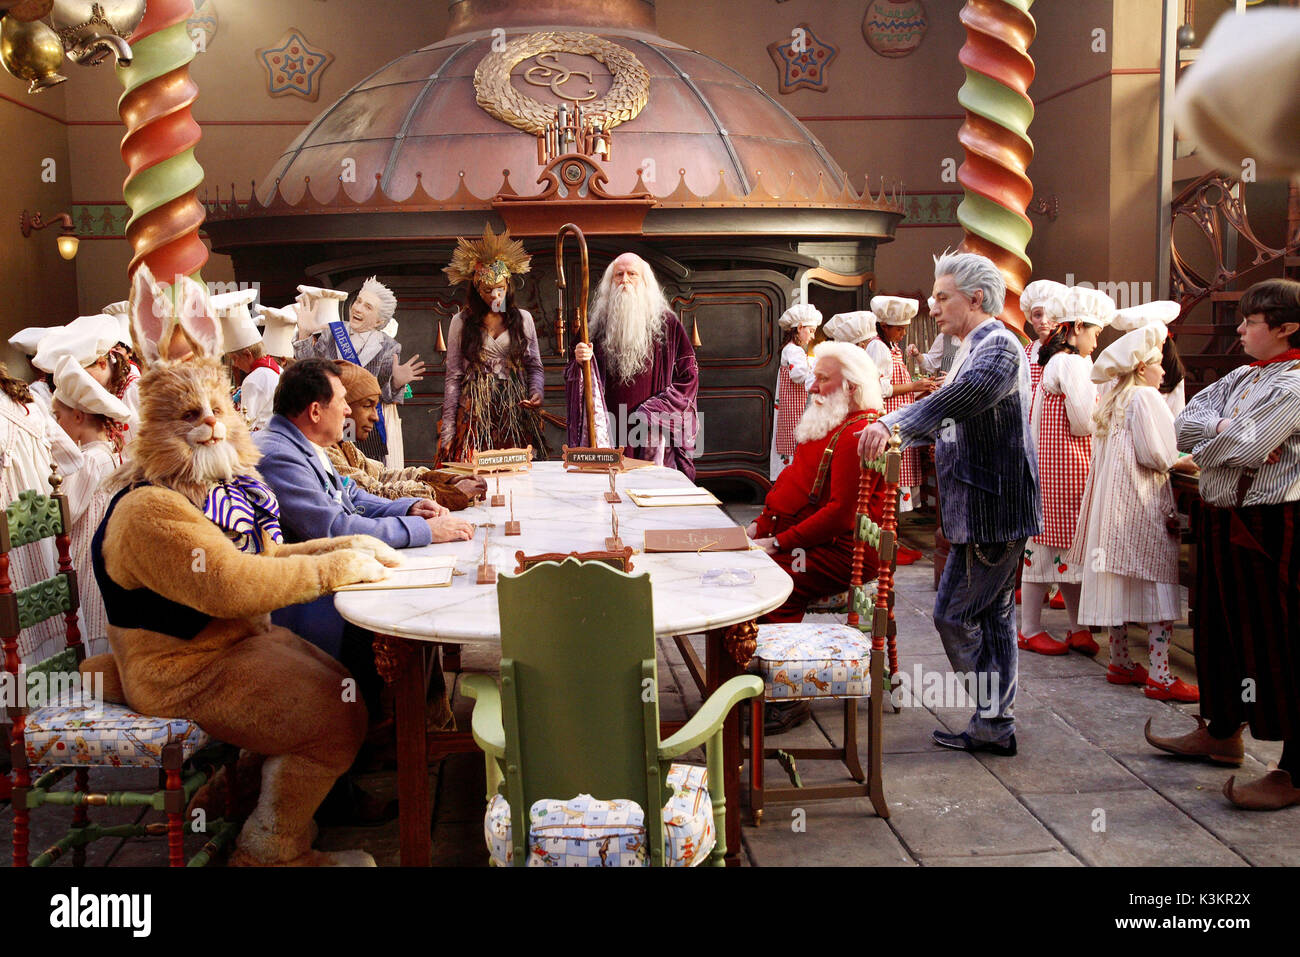 THE SANTA CLAUSE 3 : THE ESCAPE CLAUSE JAY THOMAS as The Easter Bunny, ART LAFLEUR as the Tooth Fairy, MICHAEL DORN as the Mr.Sandman, AISHA TYLER as Mother Nature, PETER BOYLE as Father Time, TIM ALLEN as Scott Calvin / Santa Claus, MARTIN SHORT as Jack Frost, SPENCER BRESLIN as Curtis the elf       Date: 2006 Stock Photo